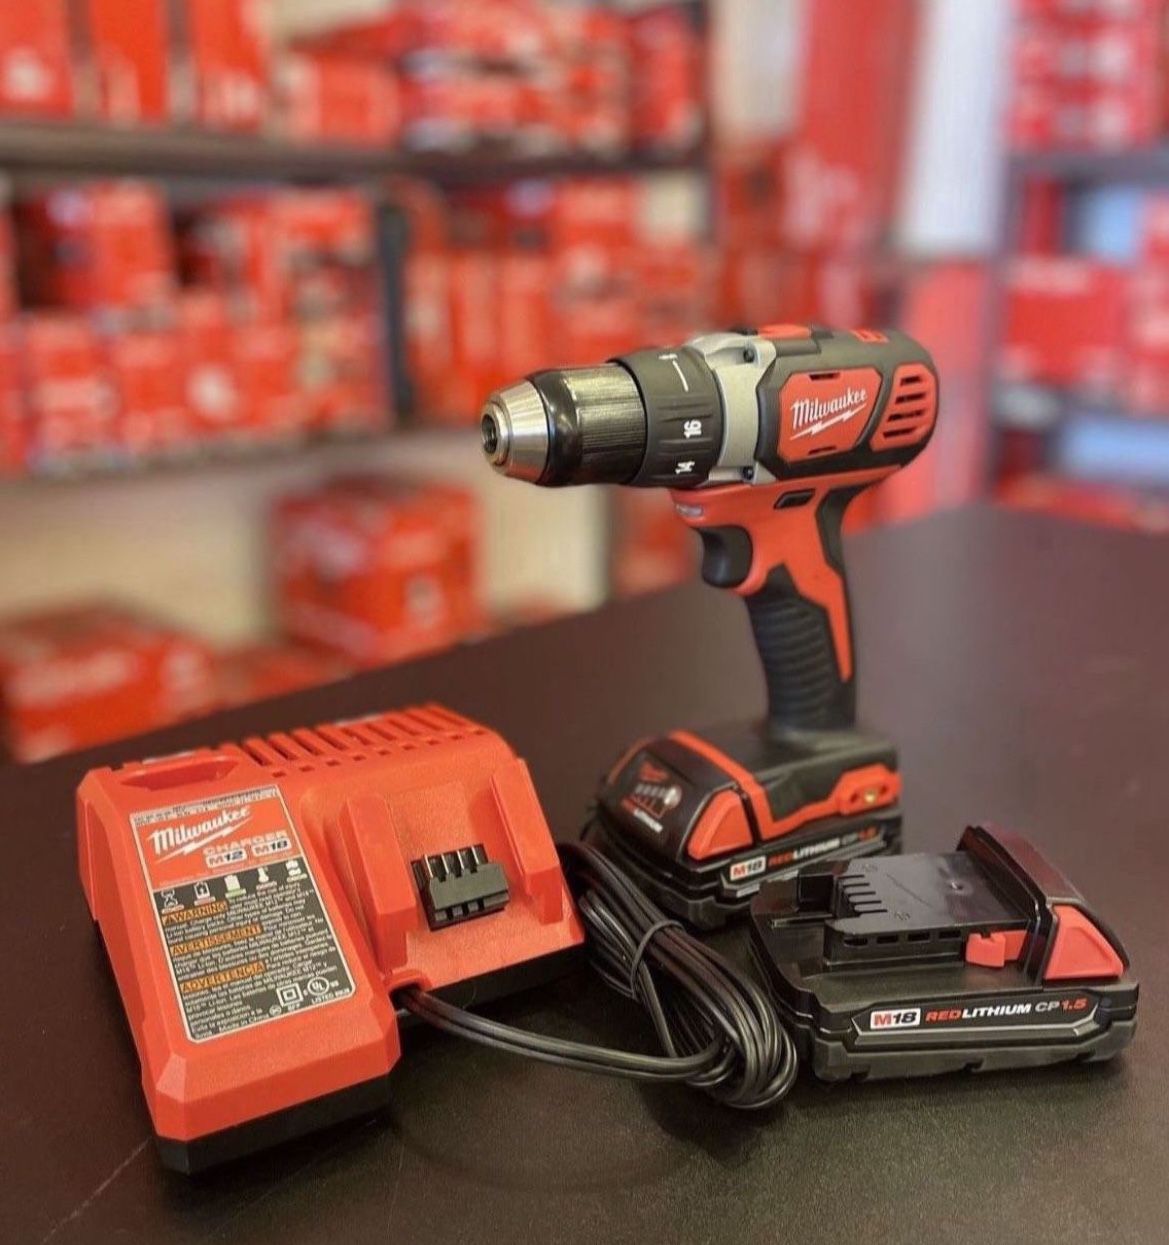 Milwaukee 18V Lithium-Ion Cordless 1/2 in. Drill Driver Kit w/(2) 1.5Ah  Batteries, Charger…….2606-22CT for Sale in Las Vegas, NV OfferUp